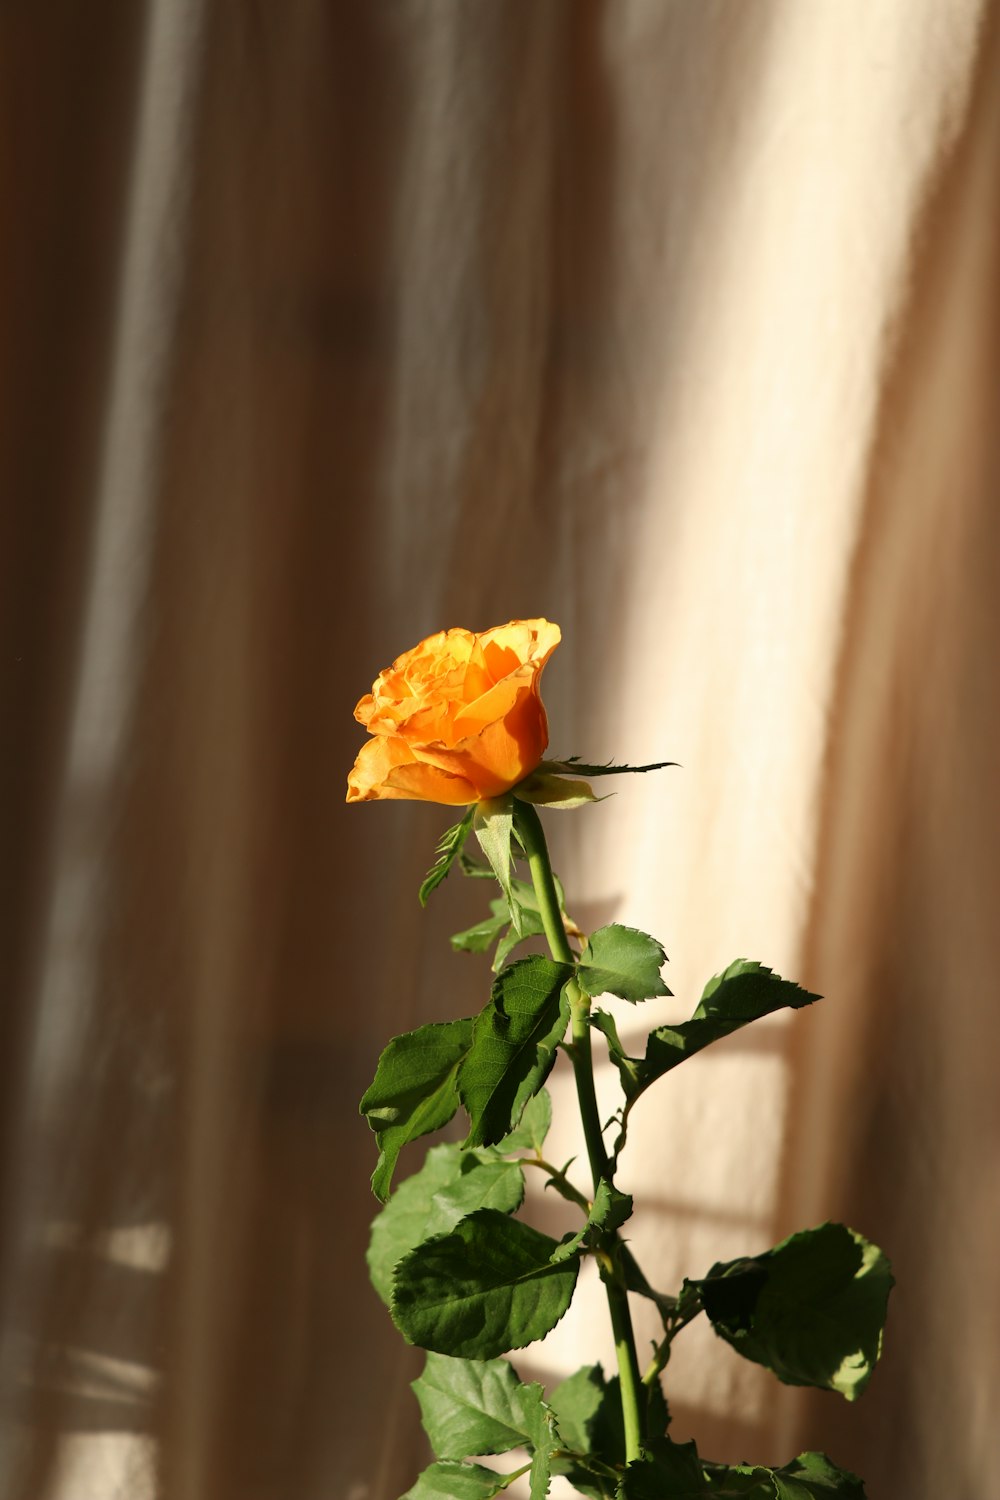 a single orange rose in a vase on a table